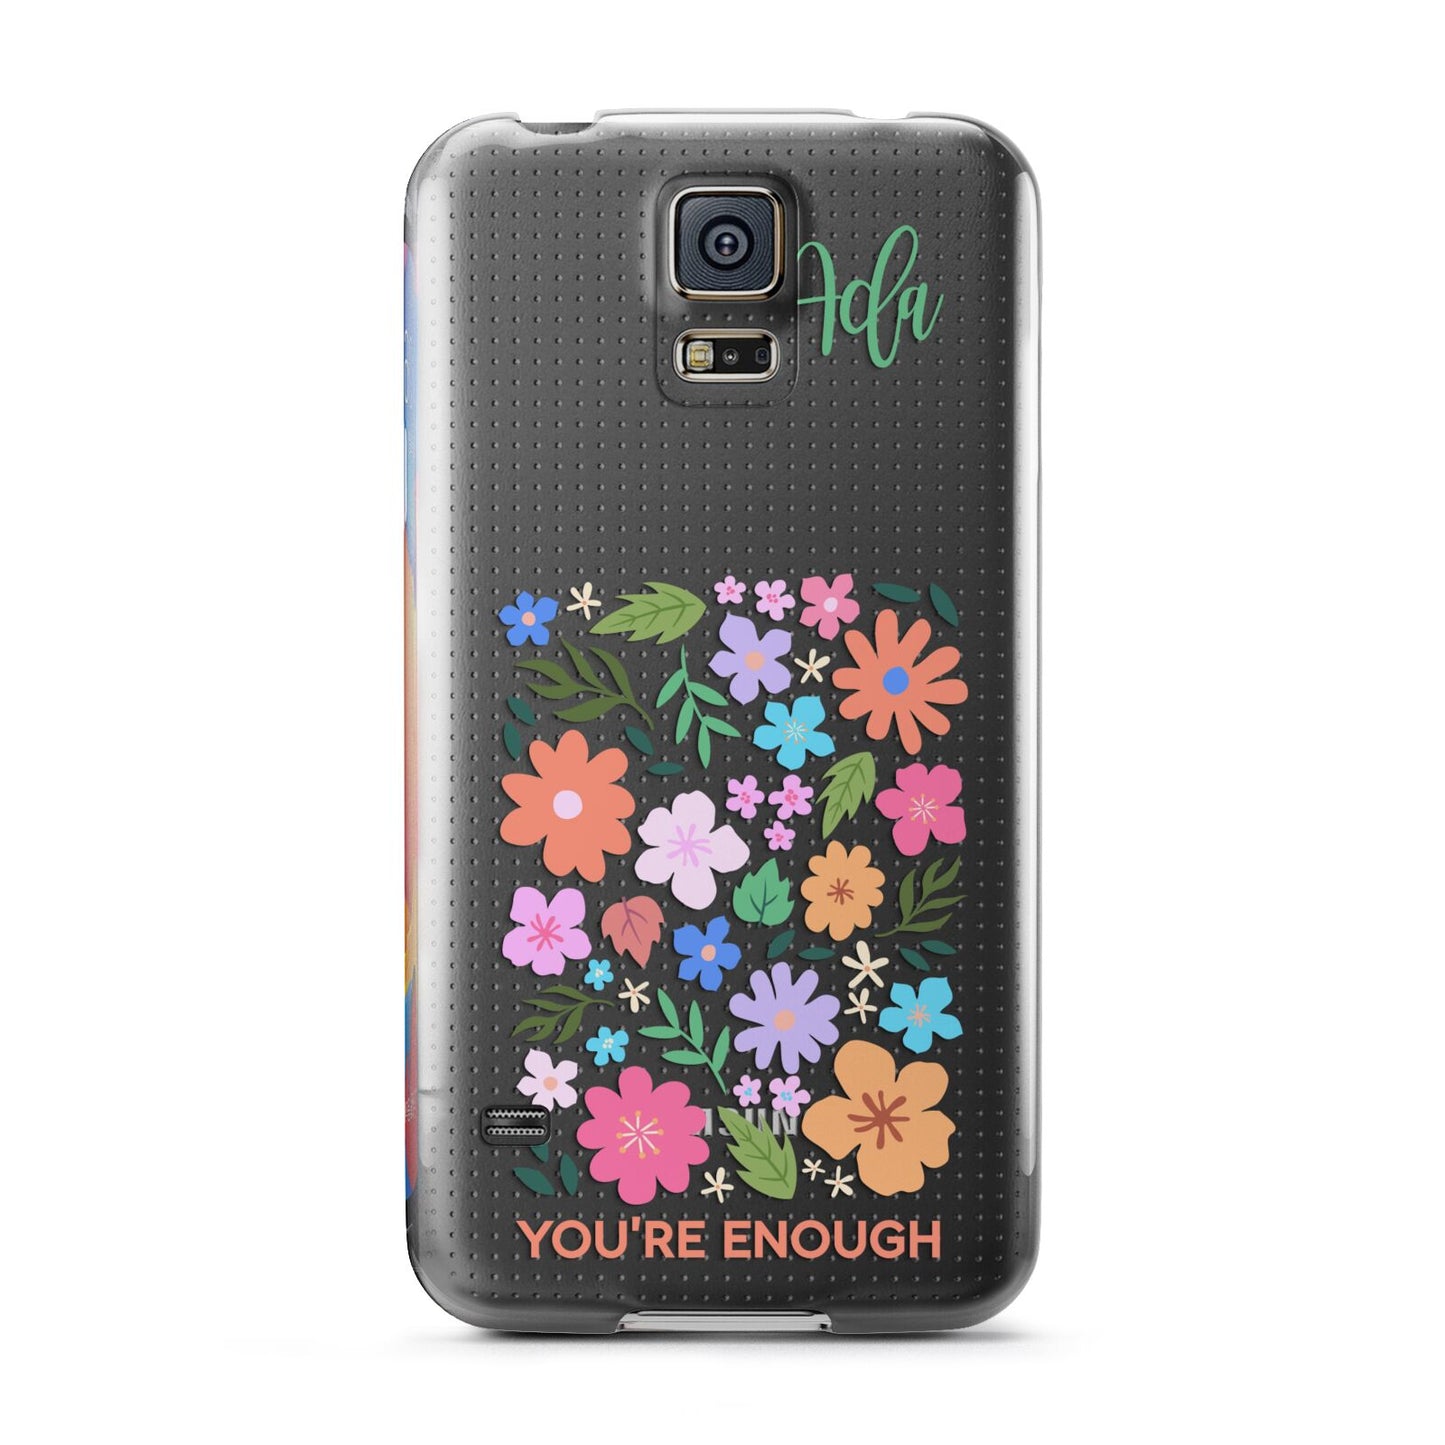 Floral Poster Samsung Galaxy S5 Case